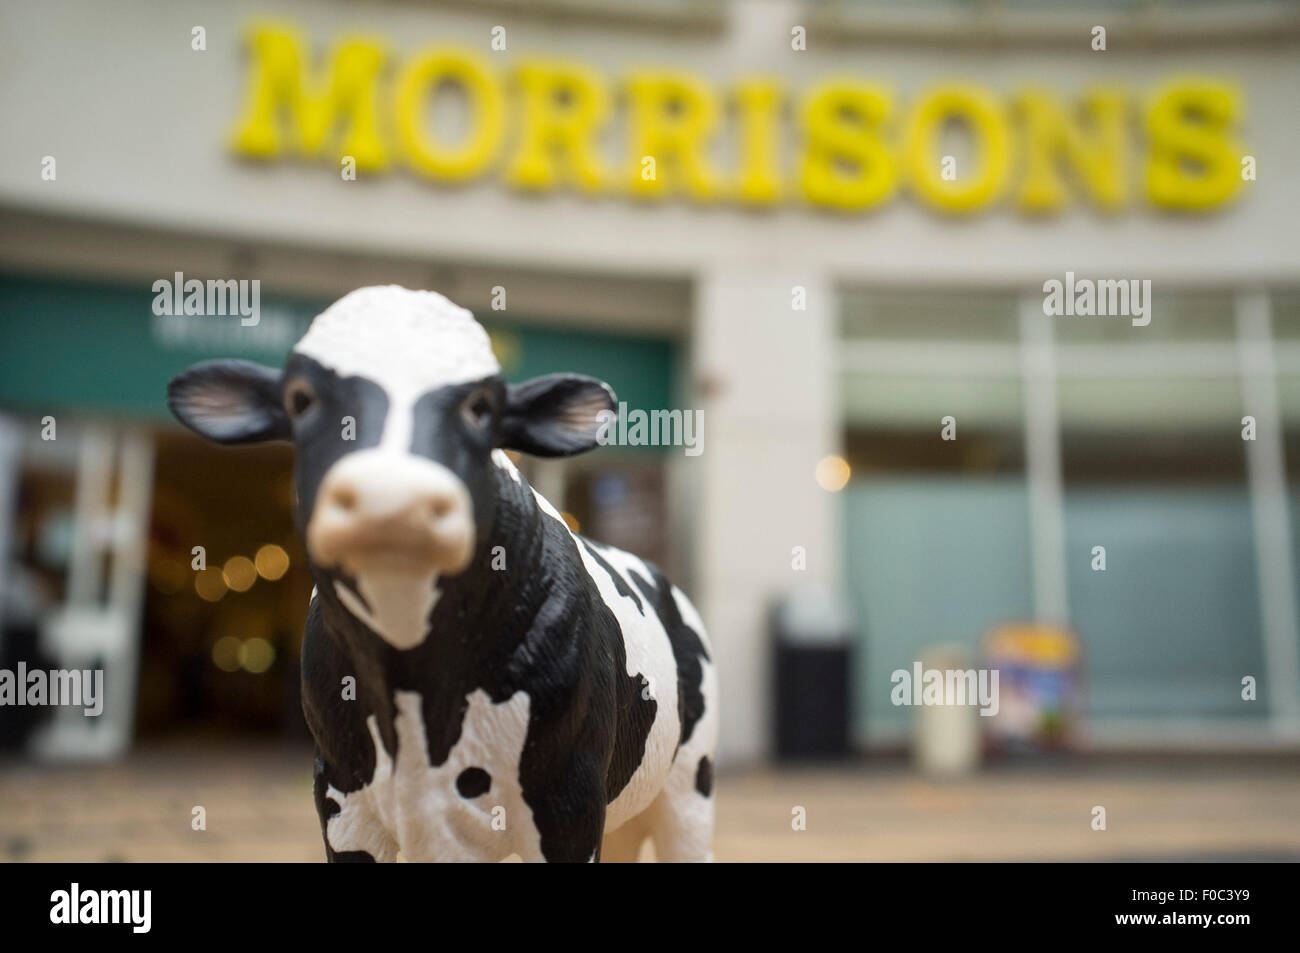 Wimbledon, London, UK. 12th Aug, 2015. Morrisons supermarket plans to launch a Milk Brand to pay an extra 10 pence per litre to help the struggling British Dairy industry. The announcement comes after a protests by British dairy farmers over falling milk prices and a meeting between Morrisons bosses and members of the NFU National Farmers Union to resolve the milk crisis Credit:  amer ghazzal/Alamy Live News Stock Photo